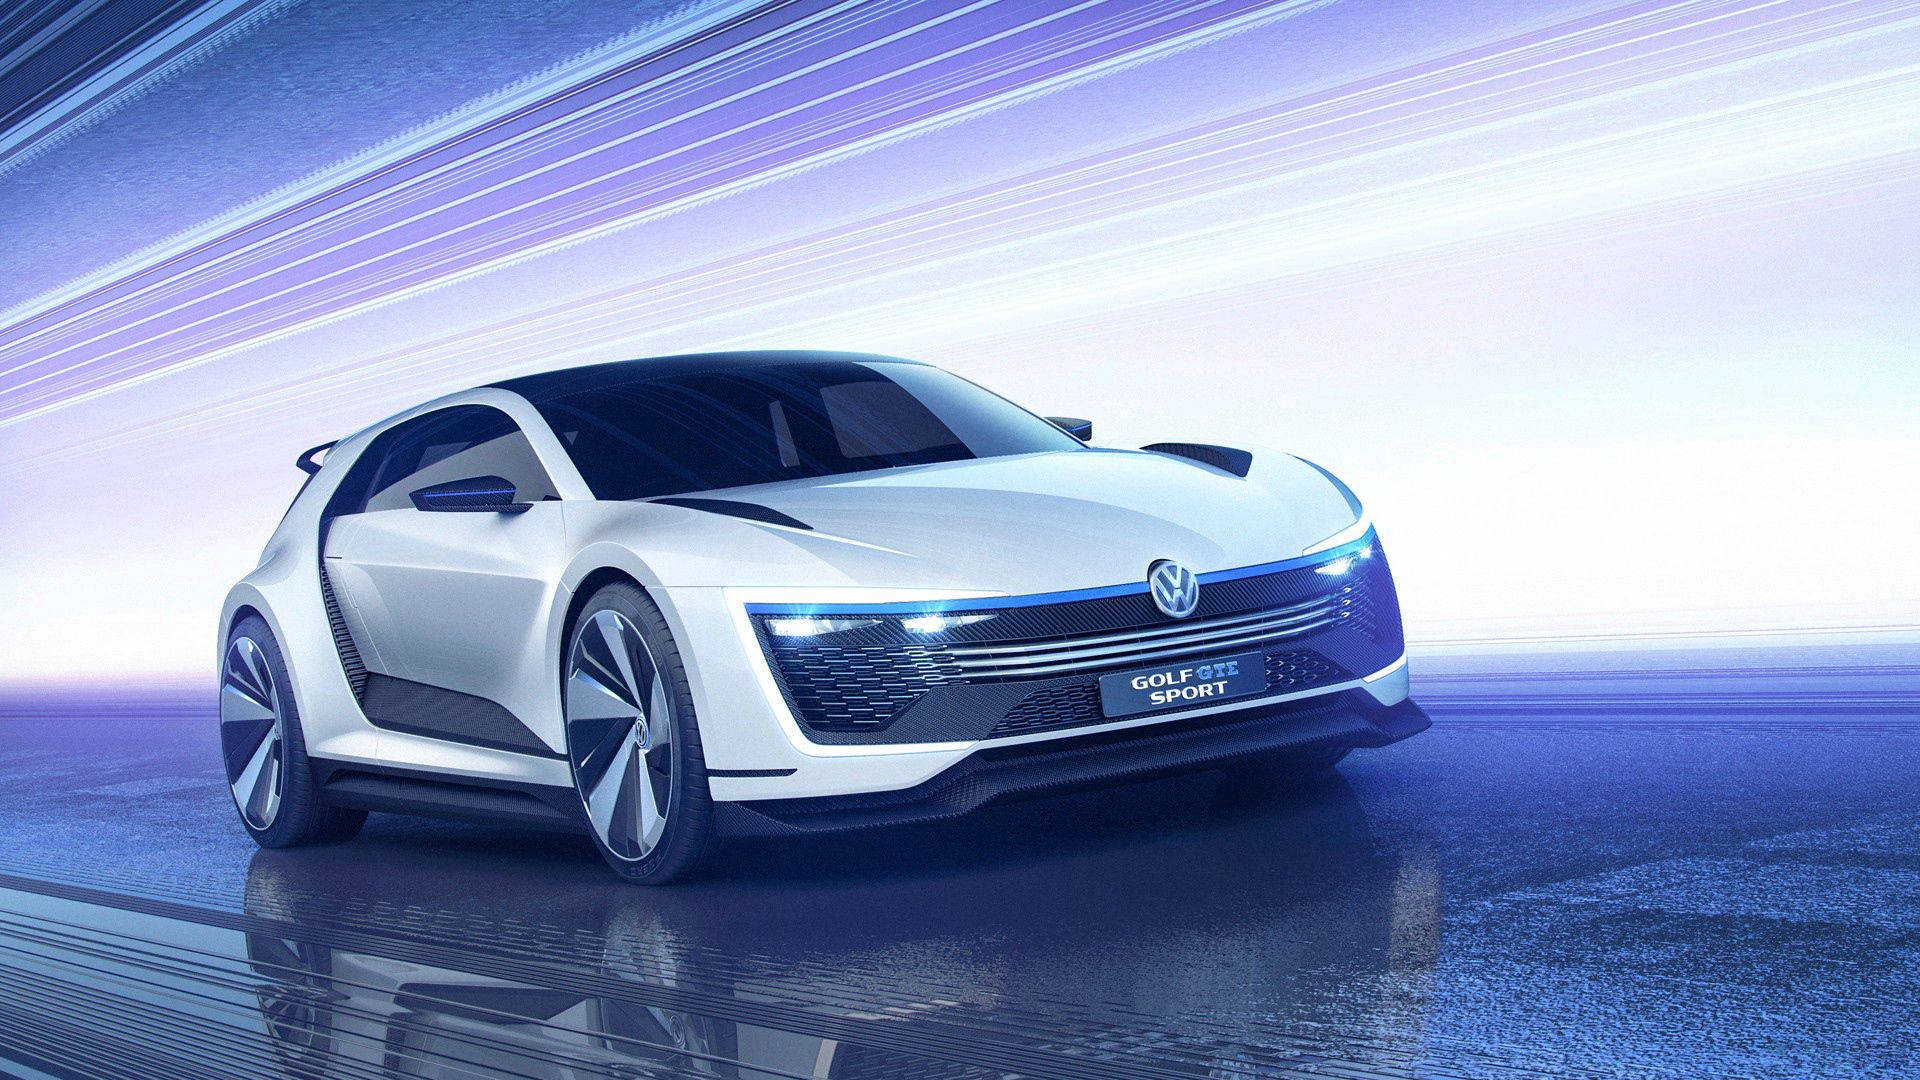 Take your golf game to the next level with the Volkswagen Golf GTE Sports Car Concept Wallpaper